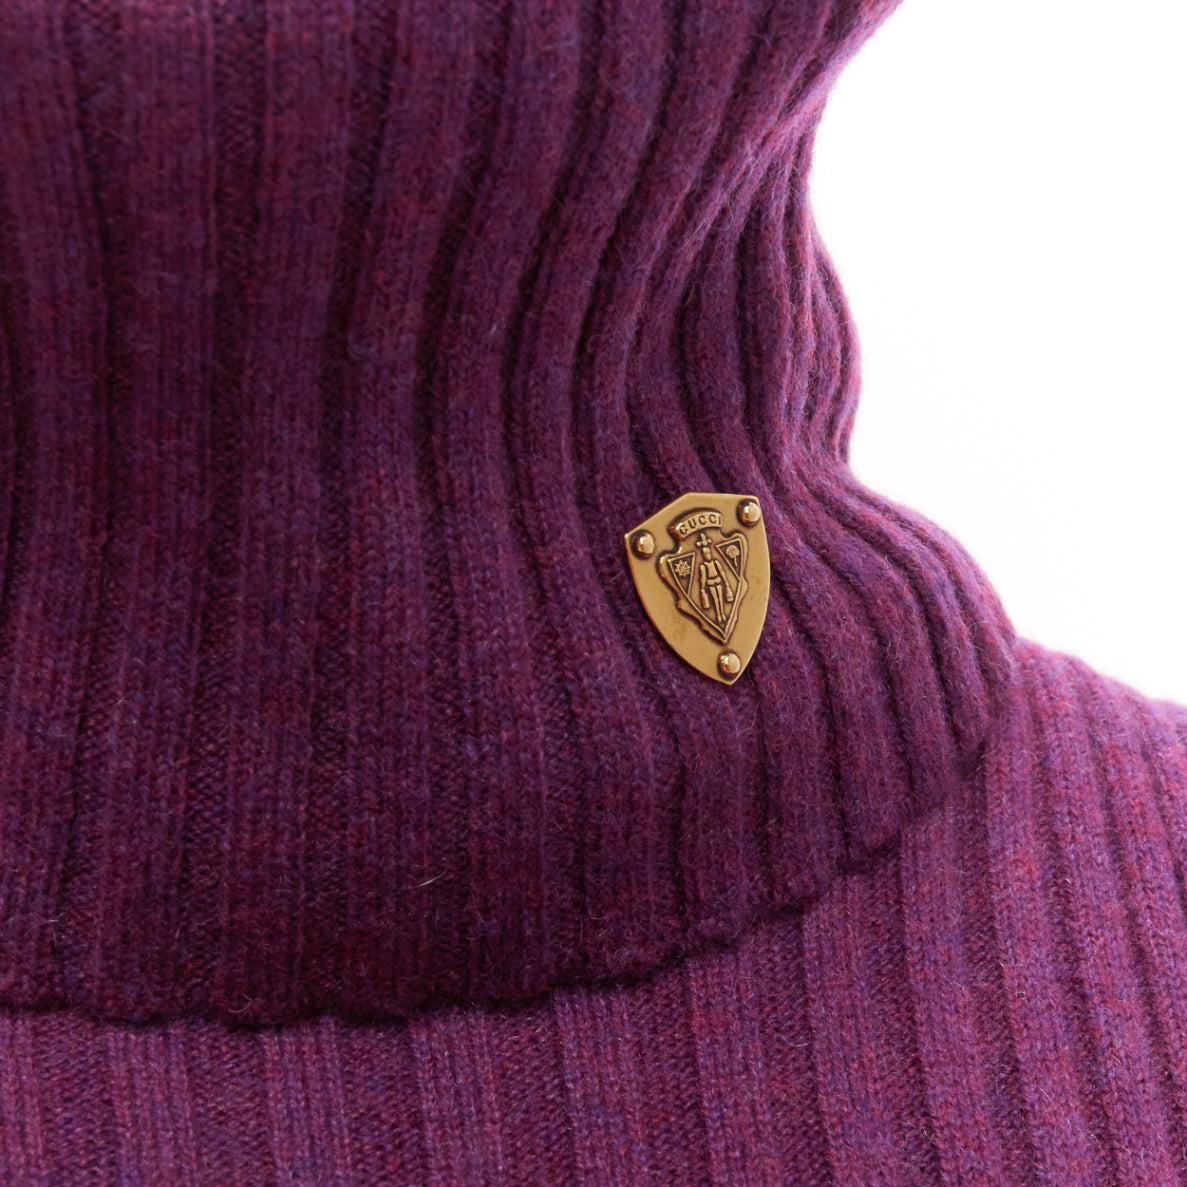 GUCCI 100% cashmere purple gold shield charm turtleneck vest tunic sweater IT38 XS
Reference: GIYG/A00336
Brand: Gucci
Material: Cashmere
Color: Purple
Pattern: Solid
Closure: Pull On
Extra Details: GUCCI gold shield logo on neck.
Made in: